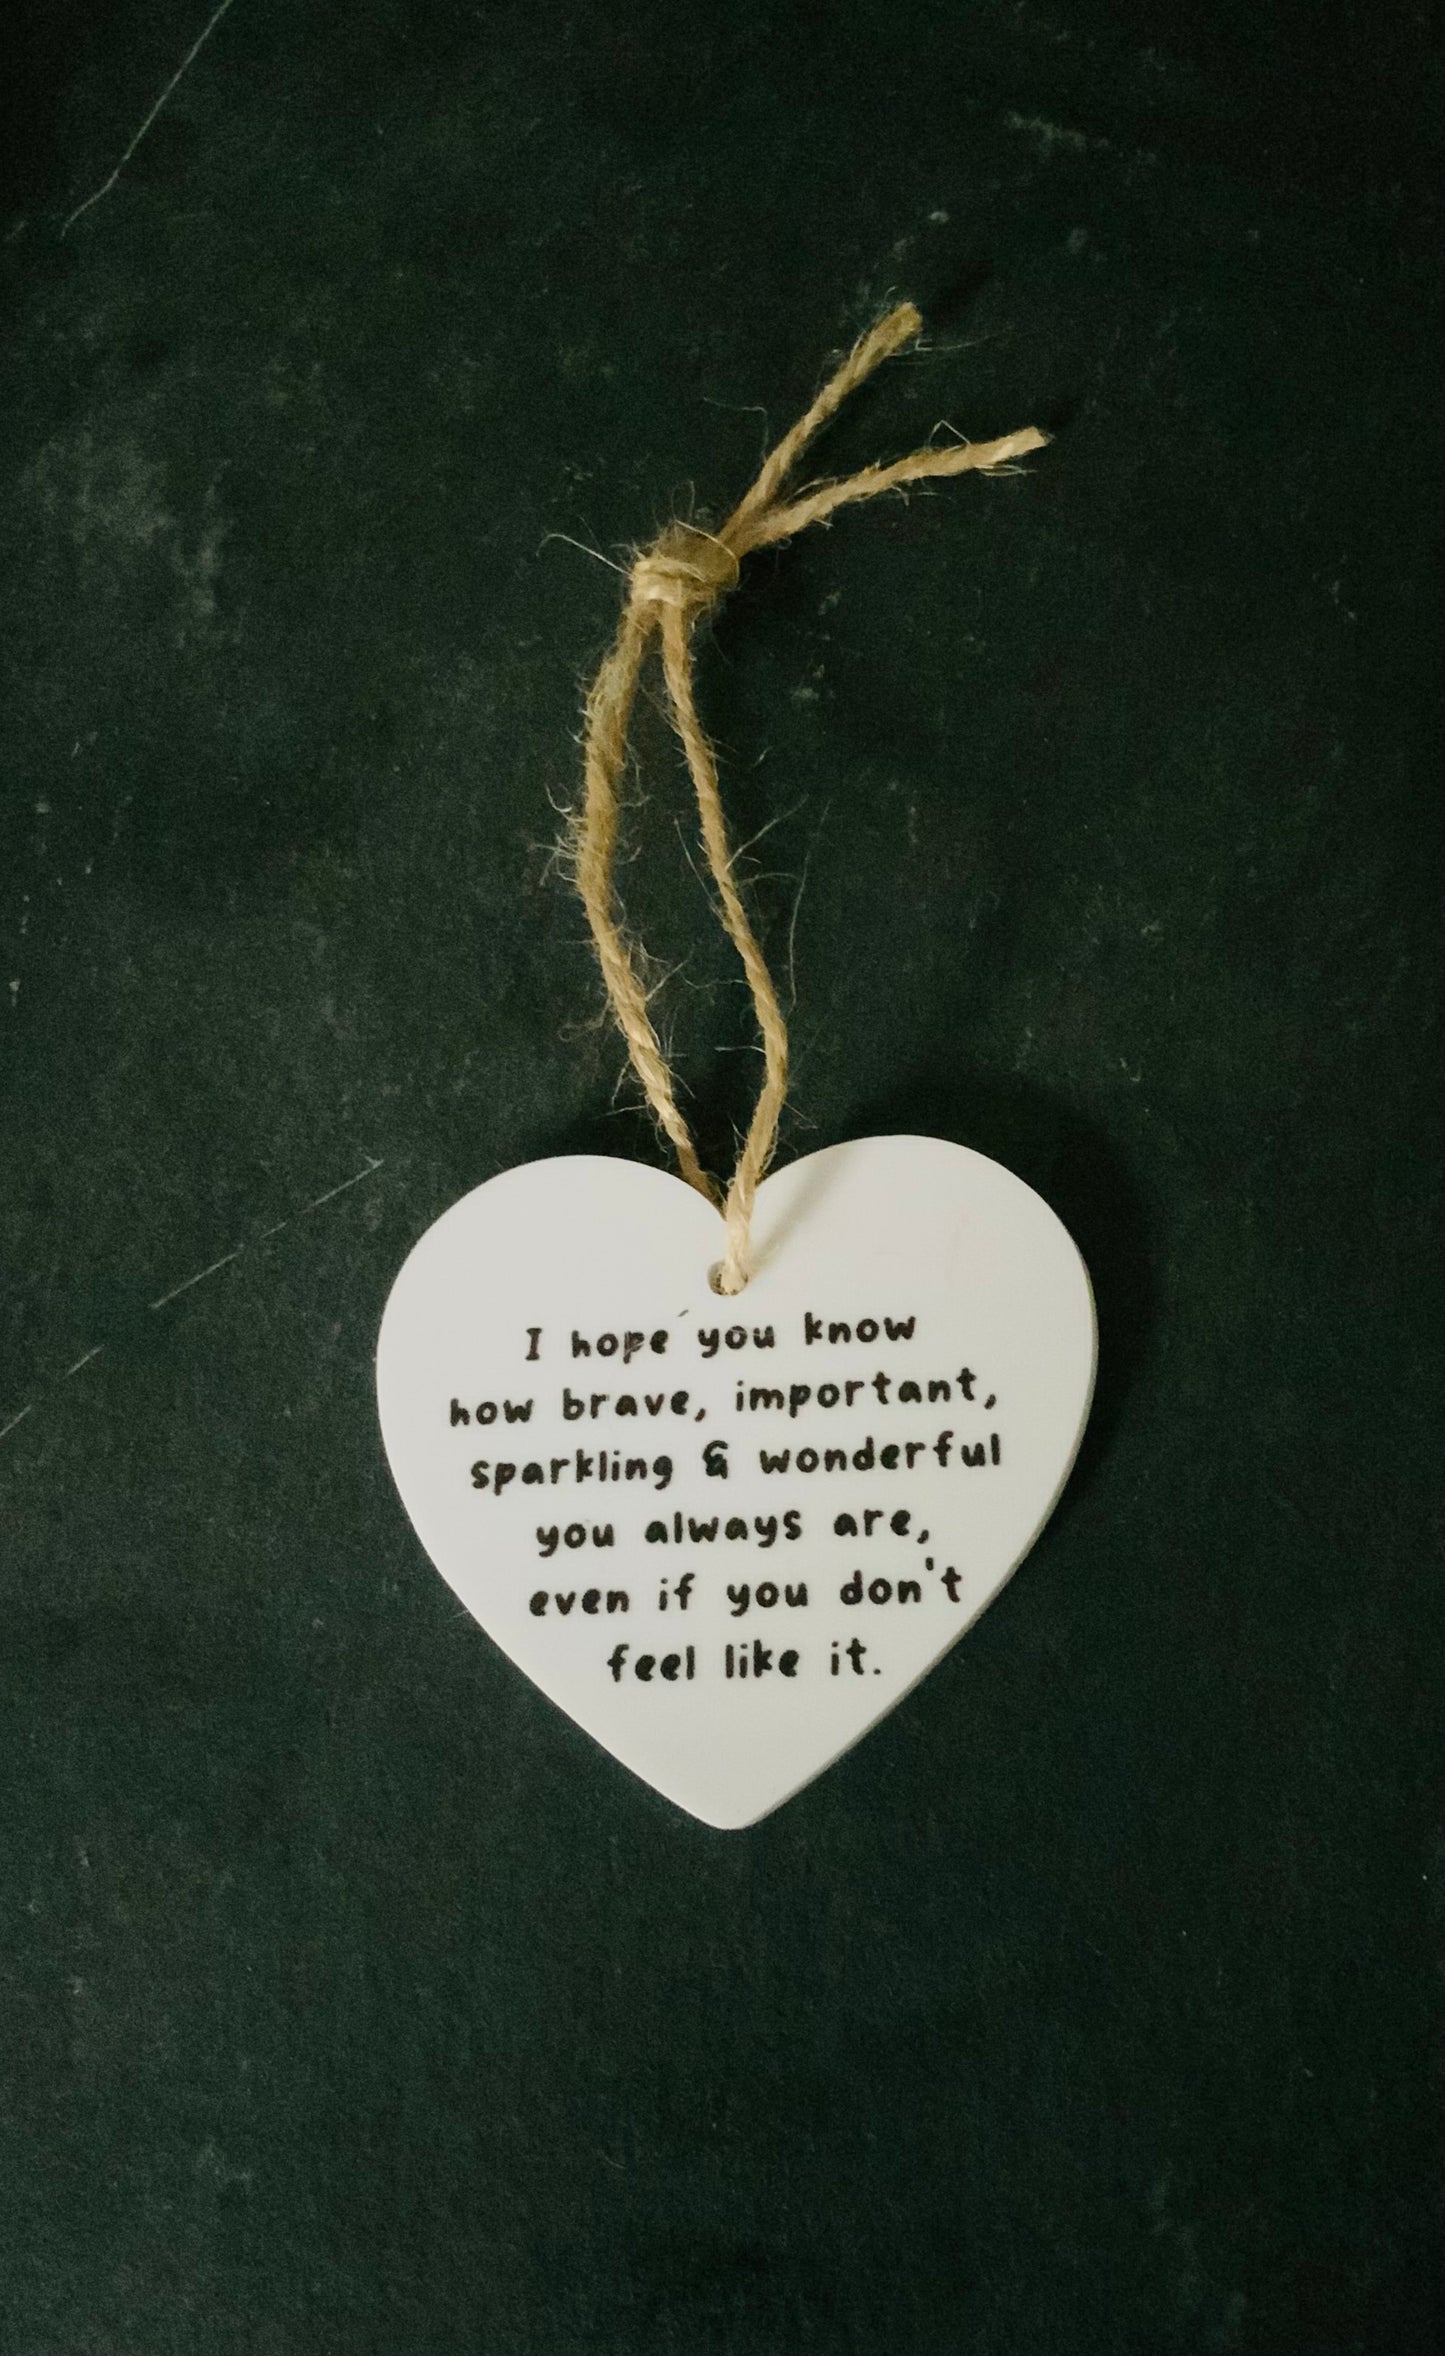 Decorative Heart with supportive, encouraging message